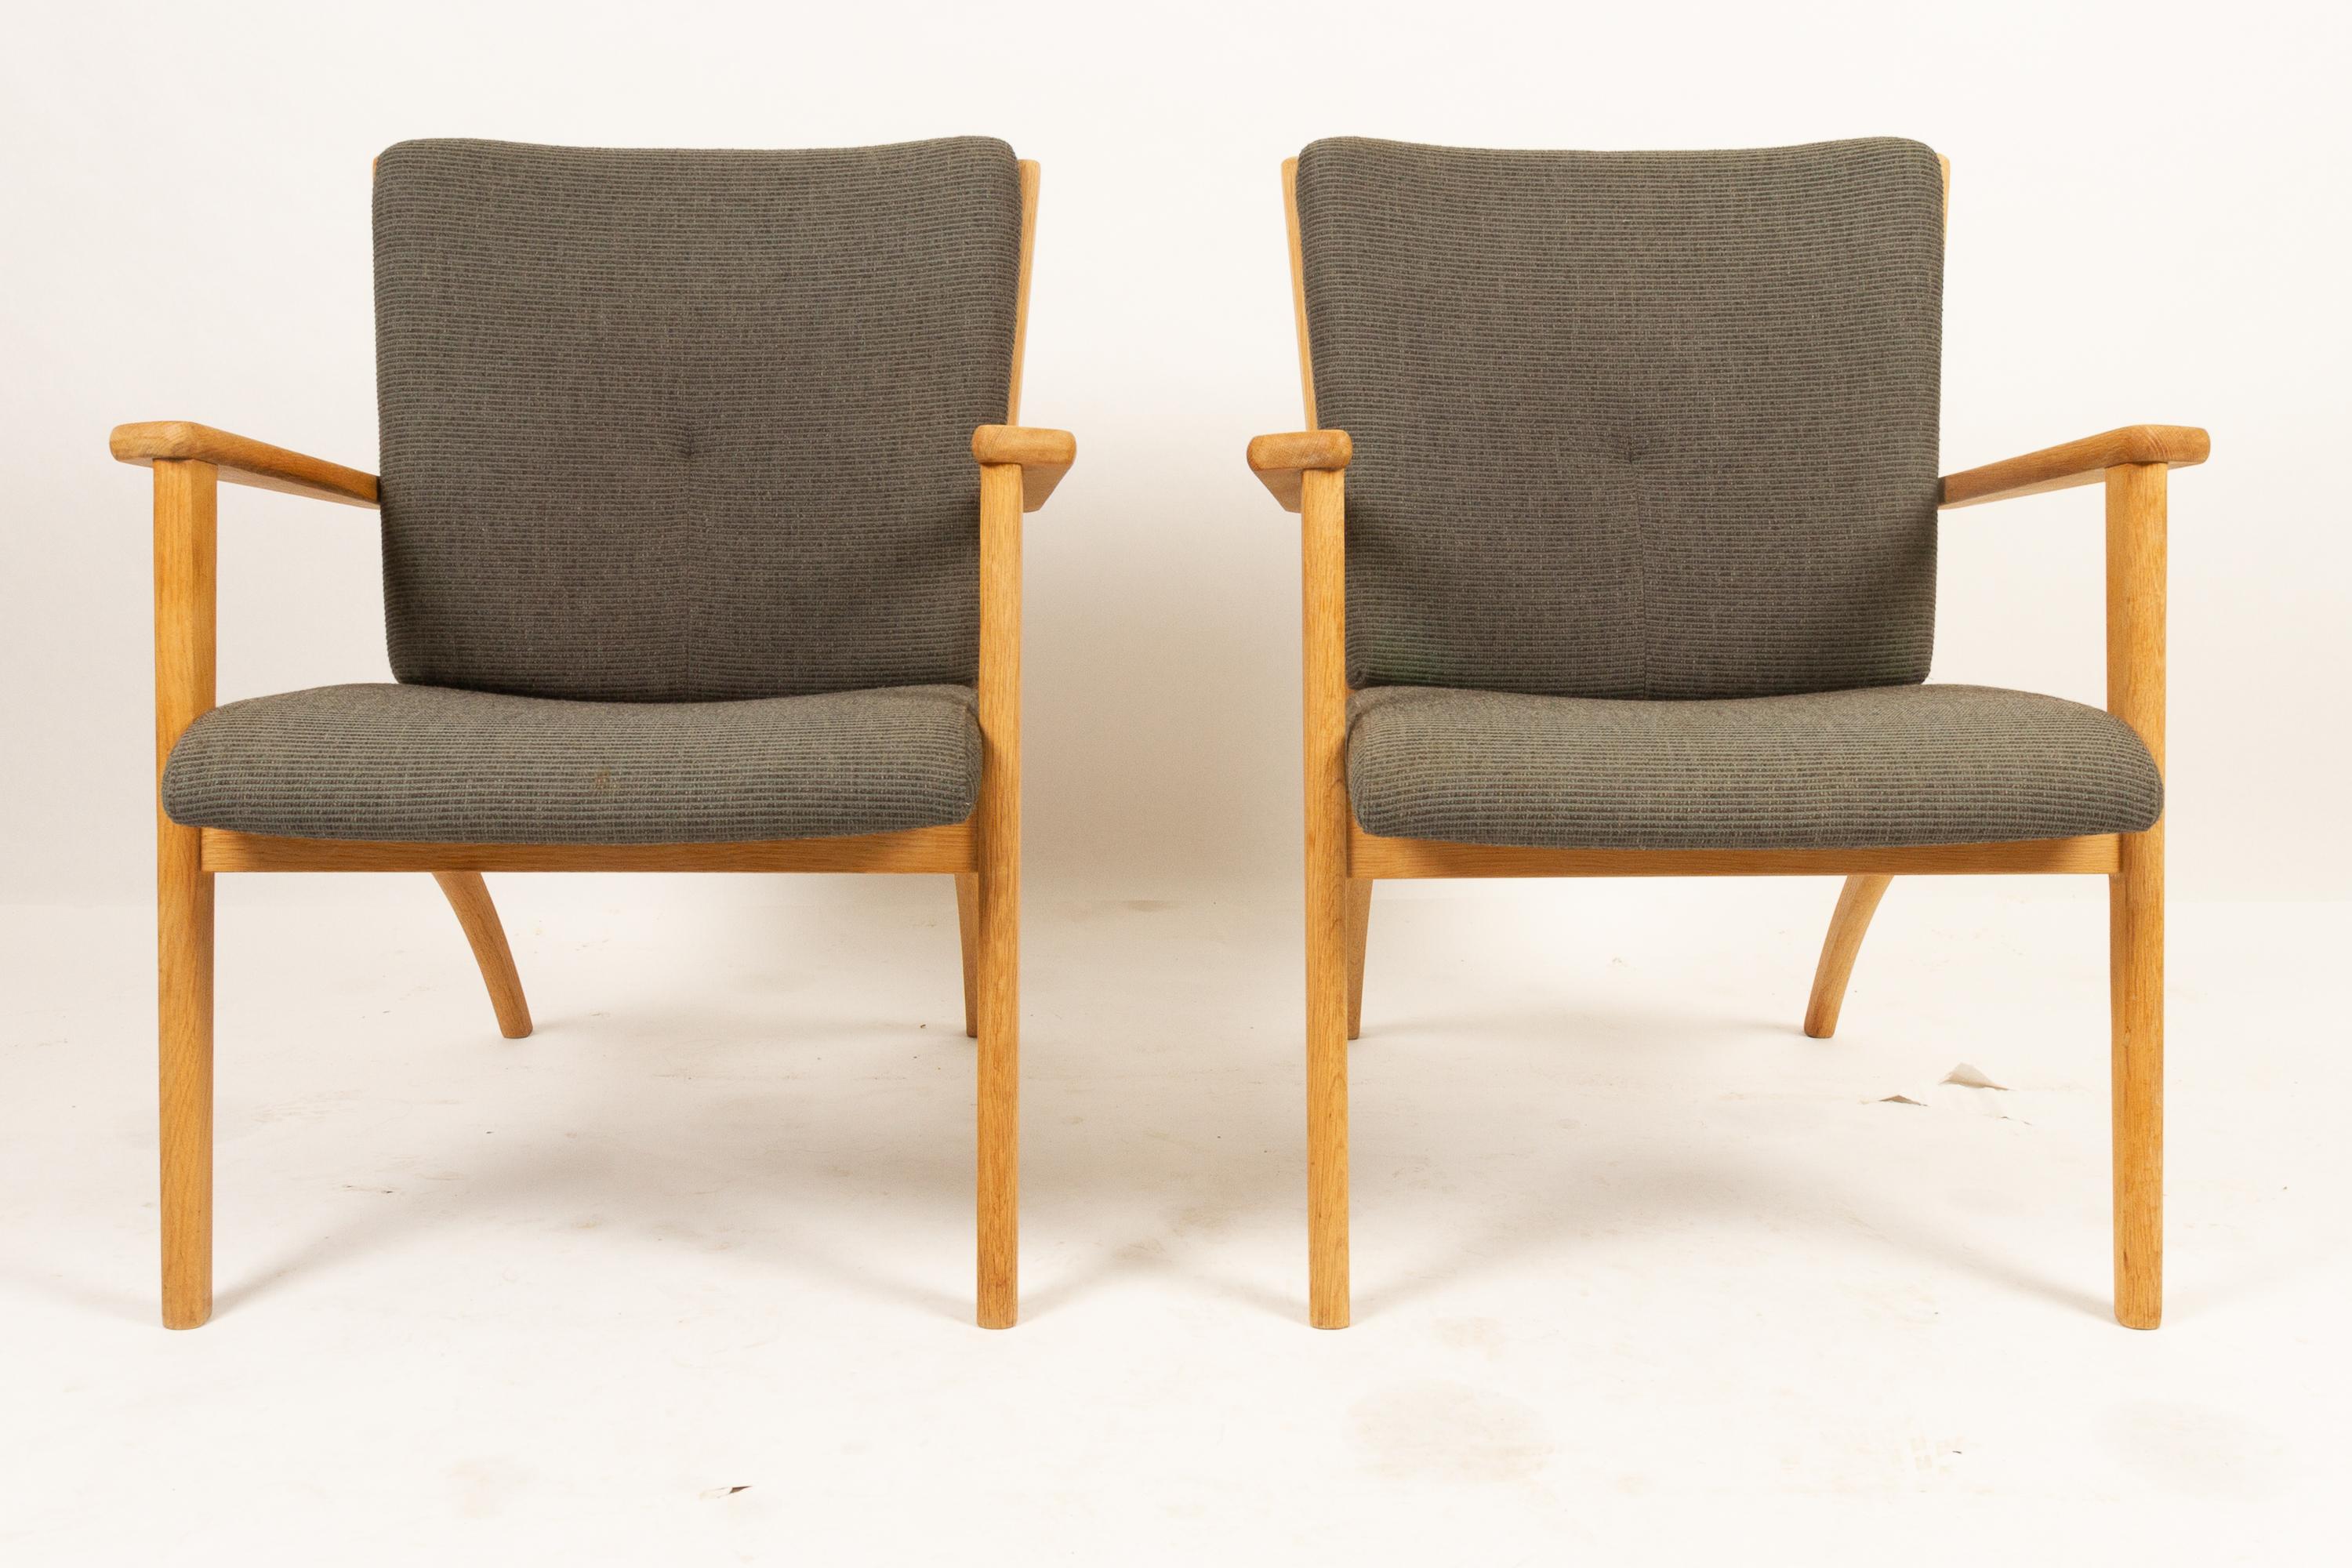 Pair of Scandinavian oak lounge chairs, 1990s
Set of 2 very comfortable and light lounge chairs in light solid oak. Very Scandinavian look. Slender frame with elegant curves and tapered legs. Back with round conical bars. Wide armrests. Upholstered